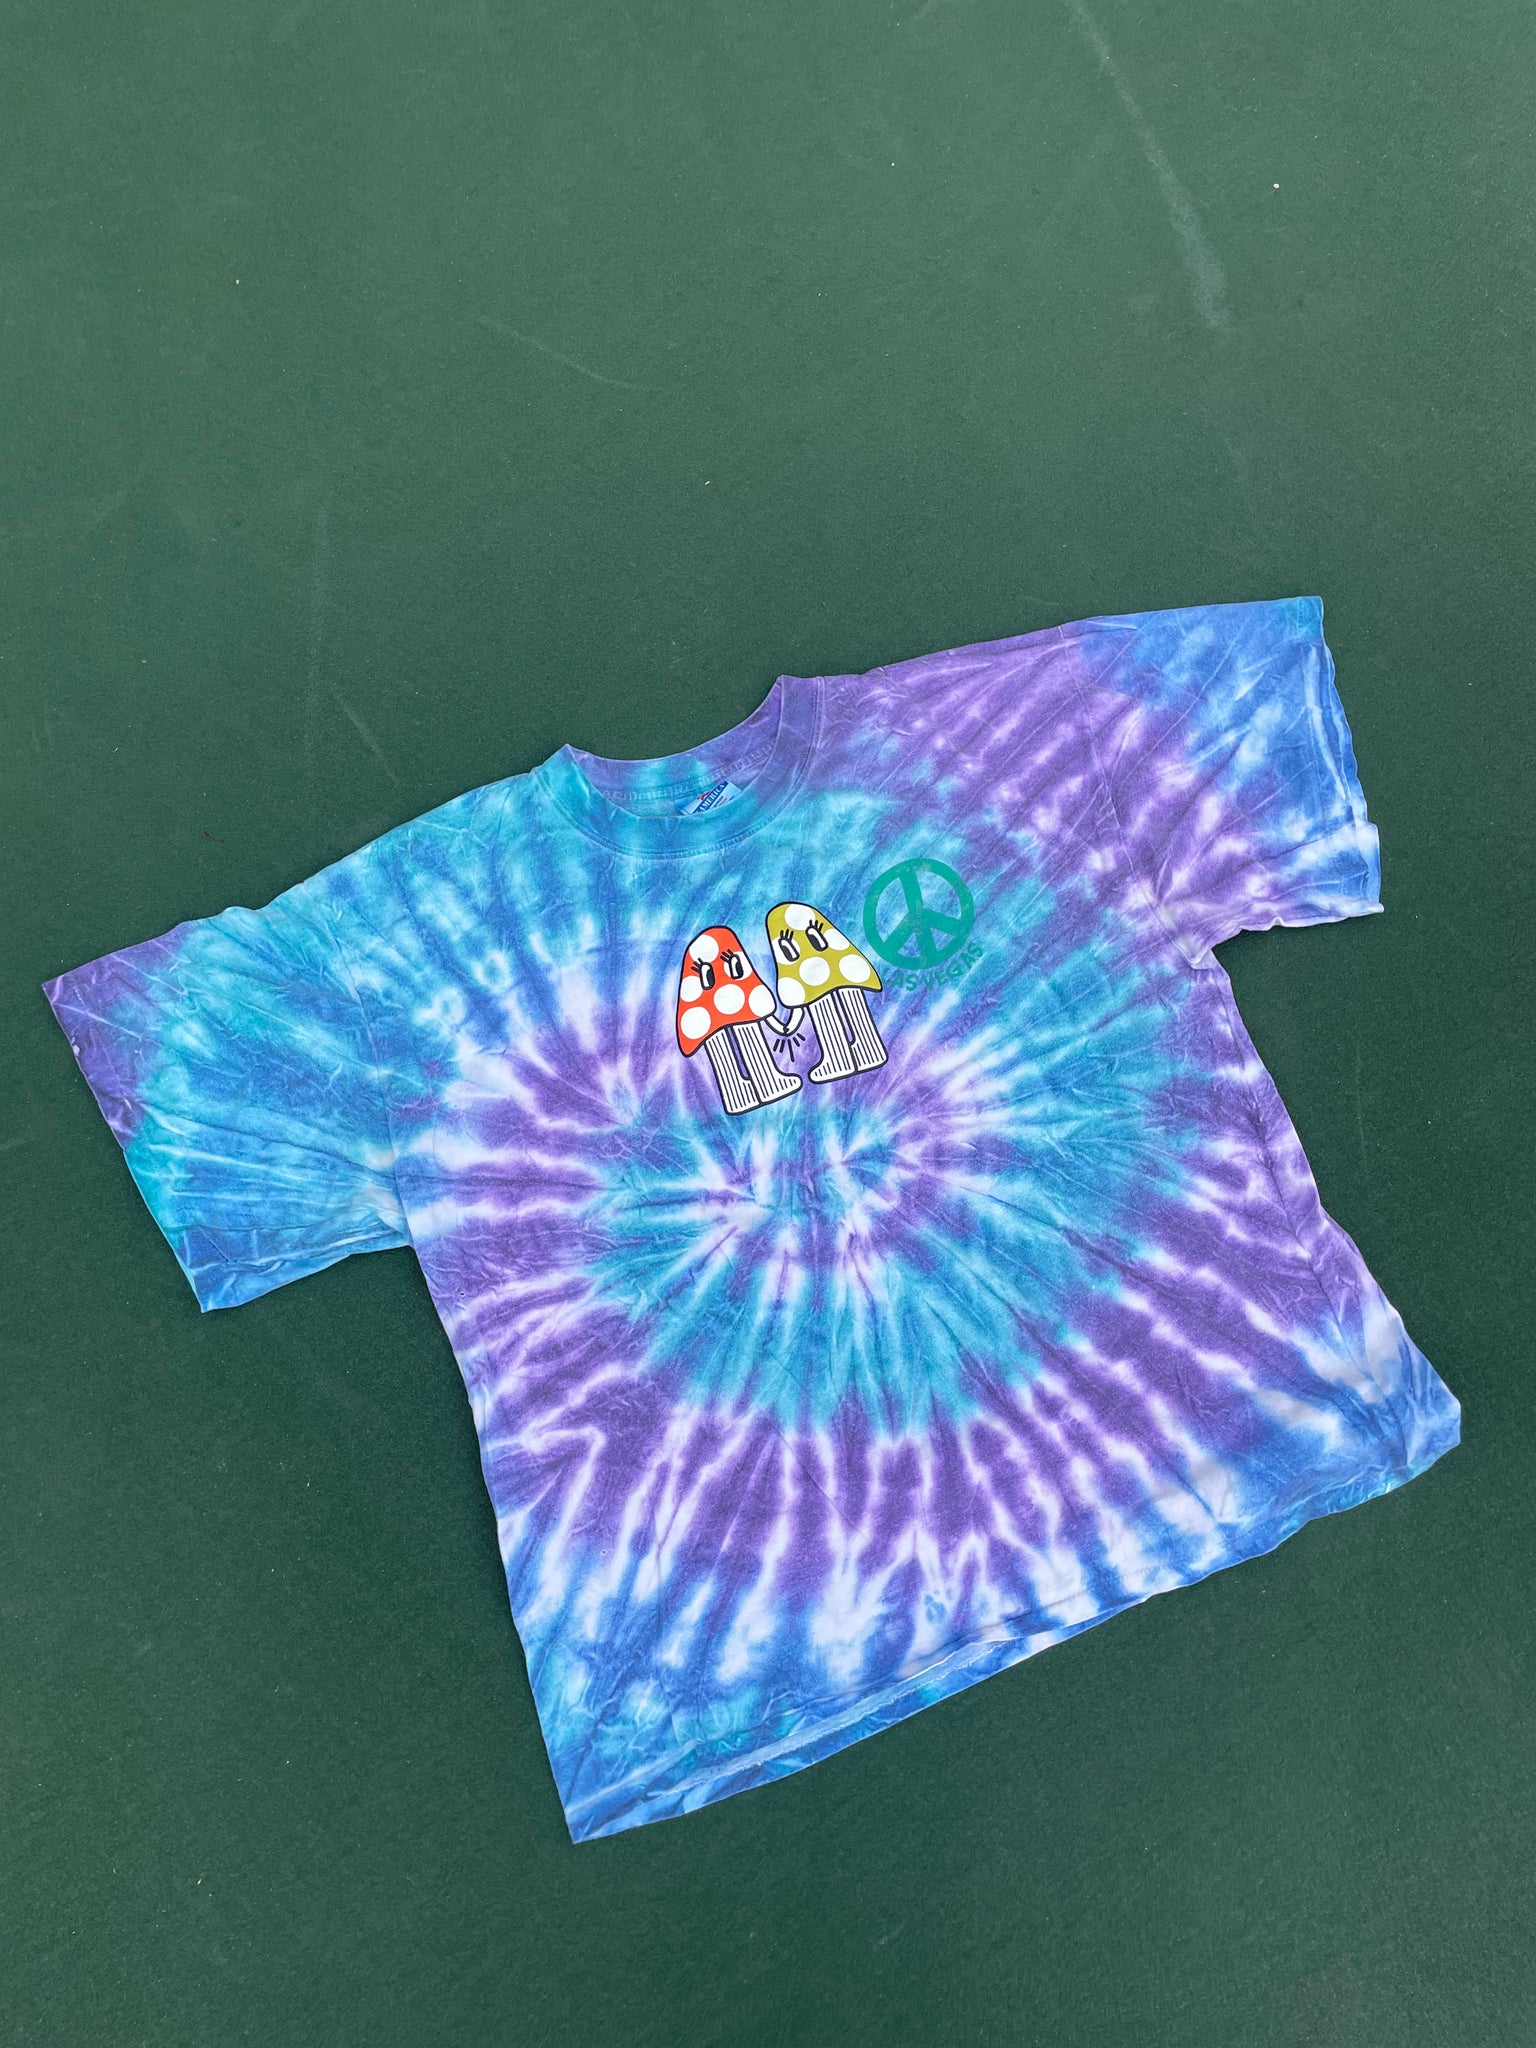 Shrooms Tie-Dyed Tee (XL)